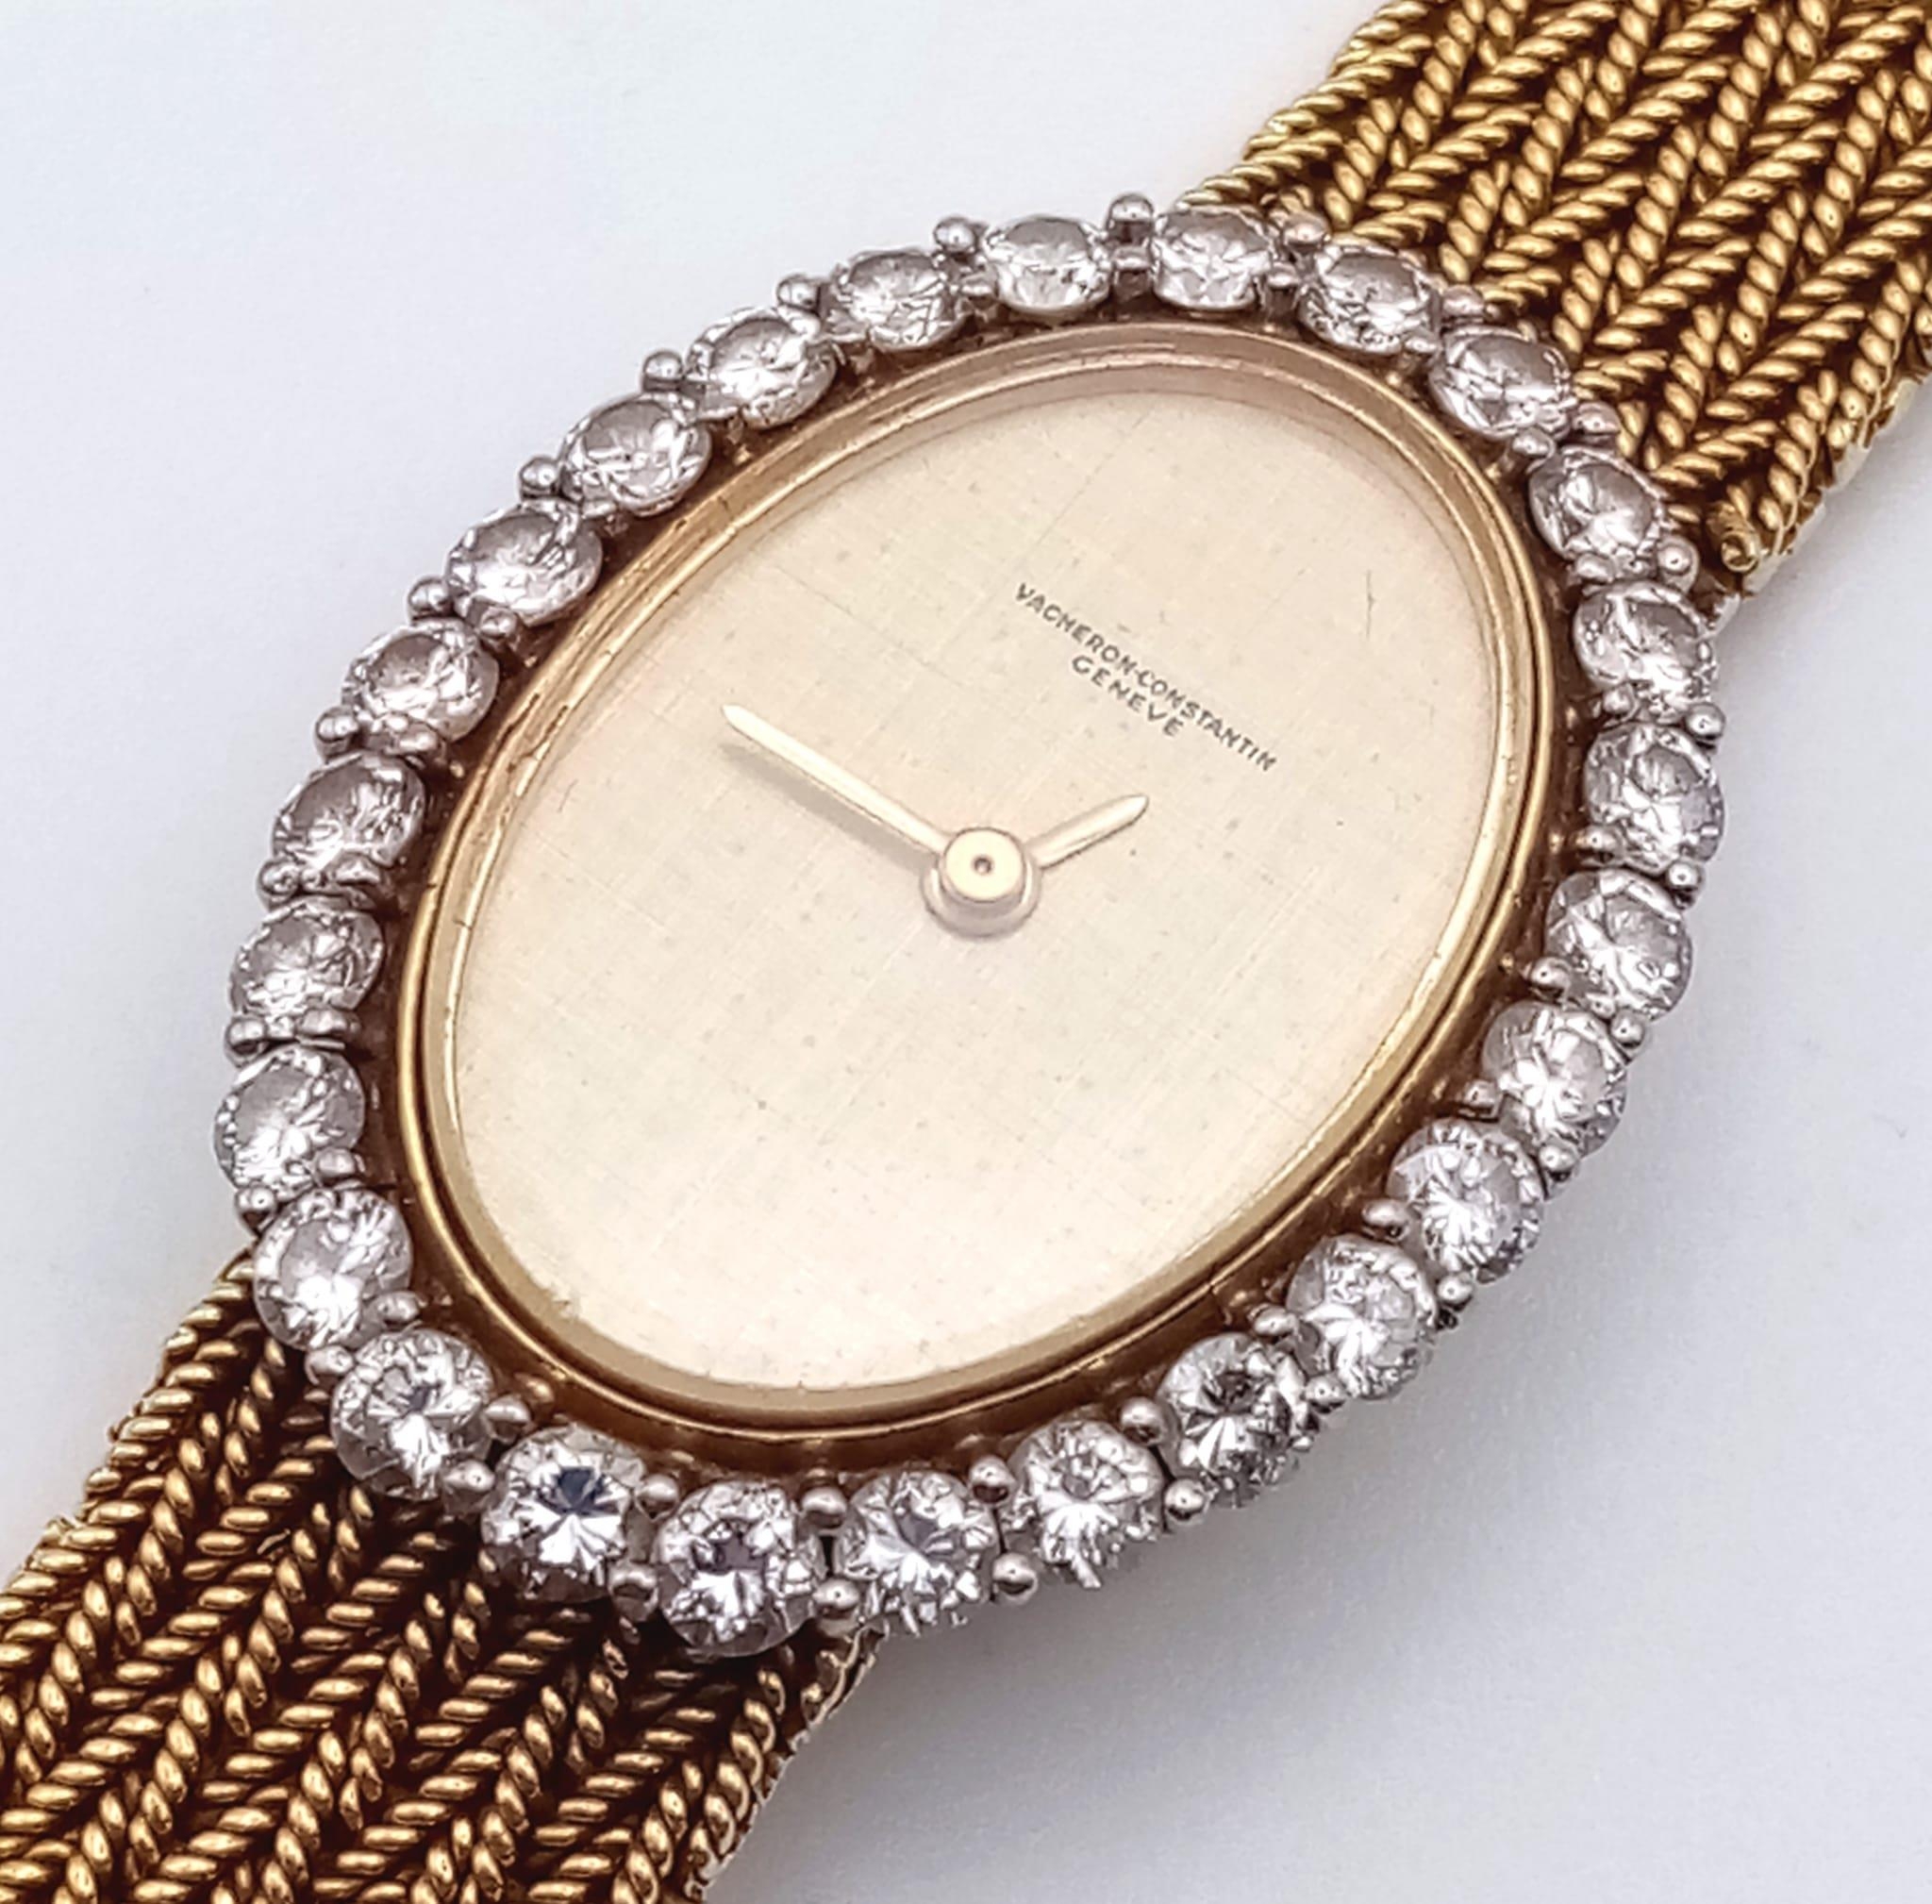 A Vacheron-Constantin 18K Yellow Gold and Diamond Ladies Watch. Gold bracelet and oval case - - Image 4 of 8